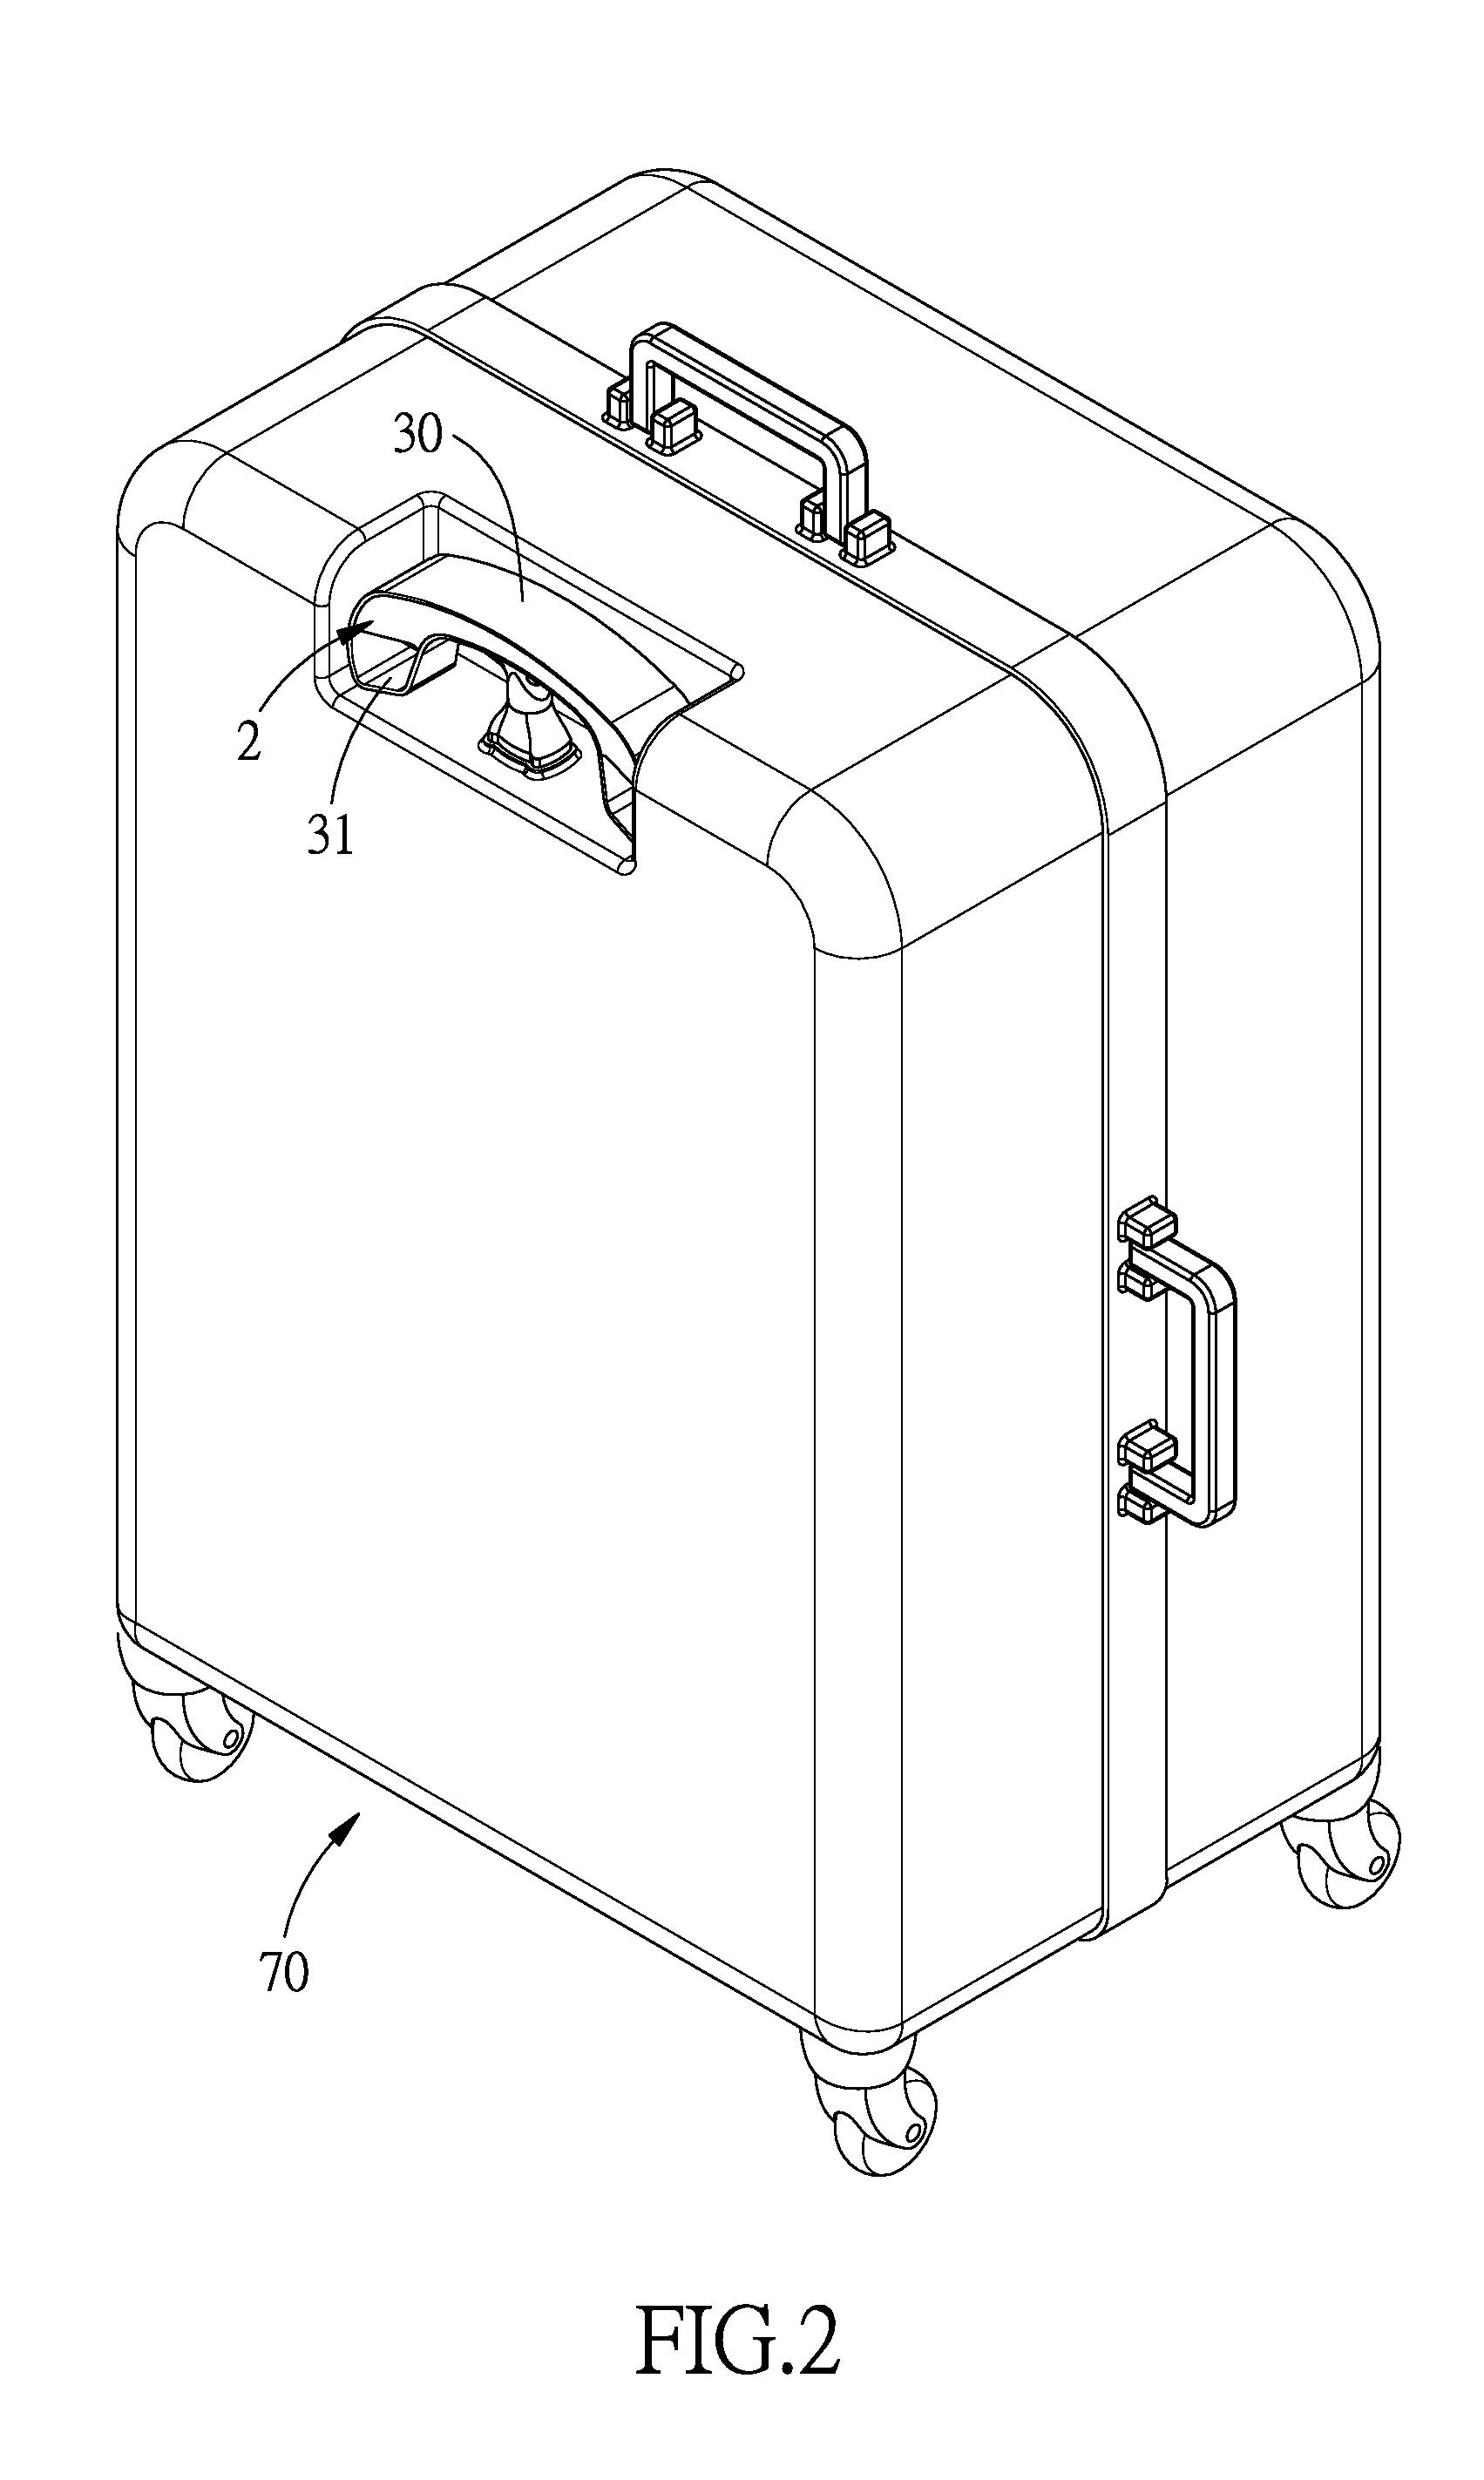 Handle structure for a draw bar of a luggage case